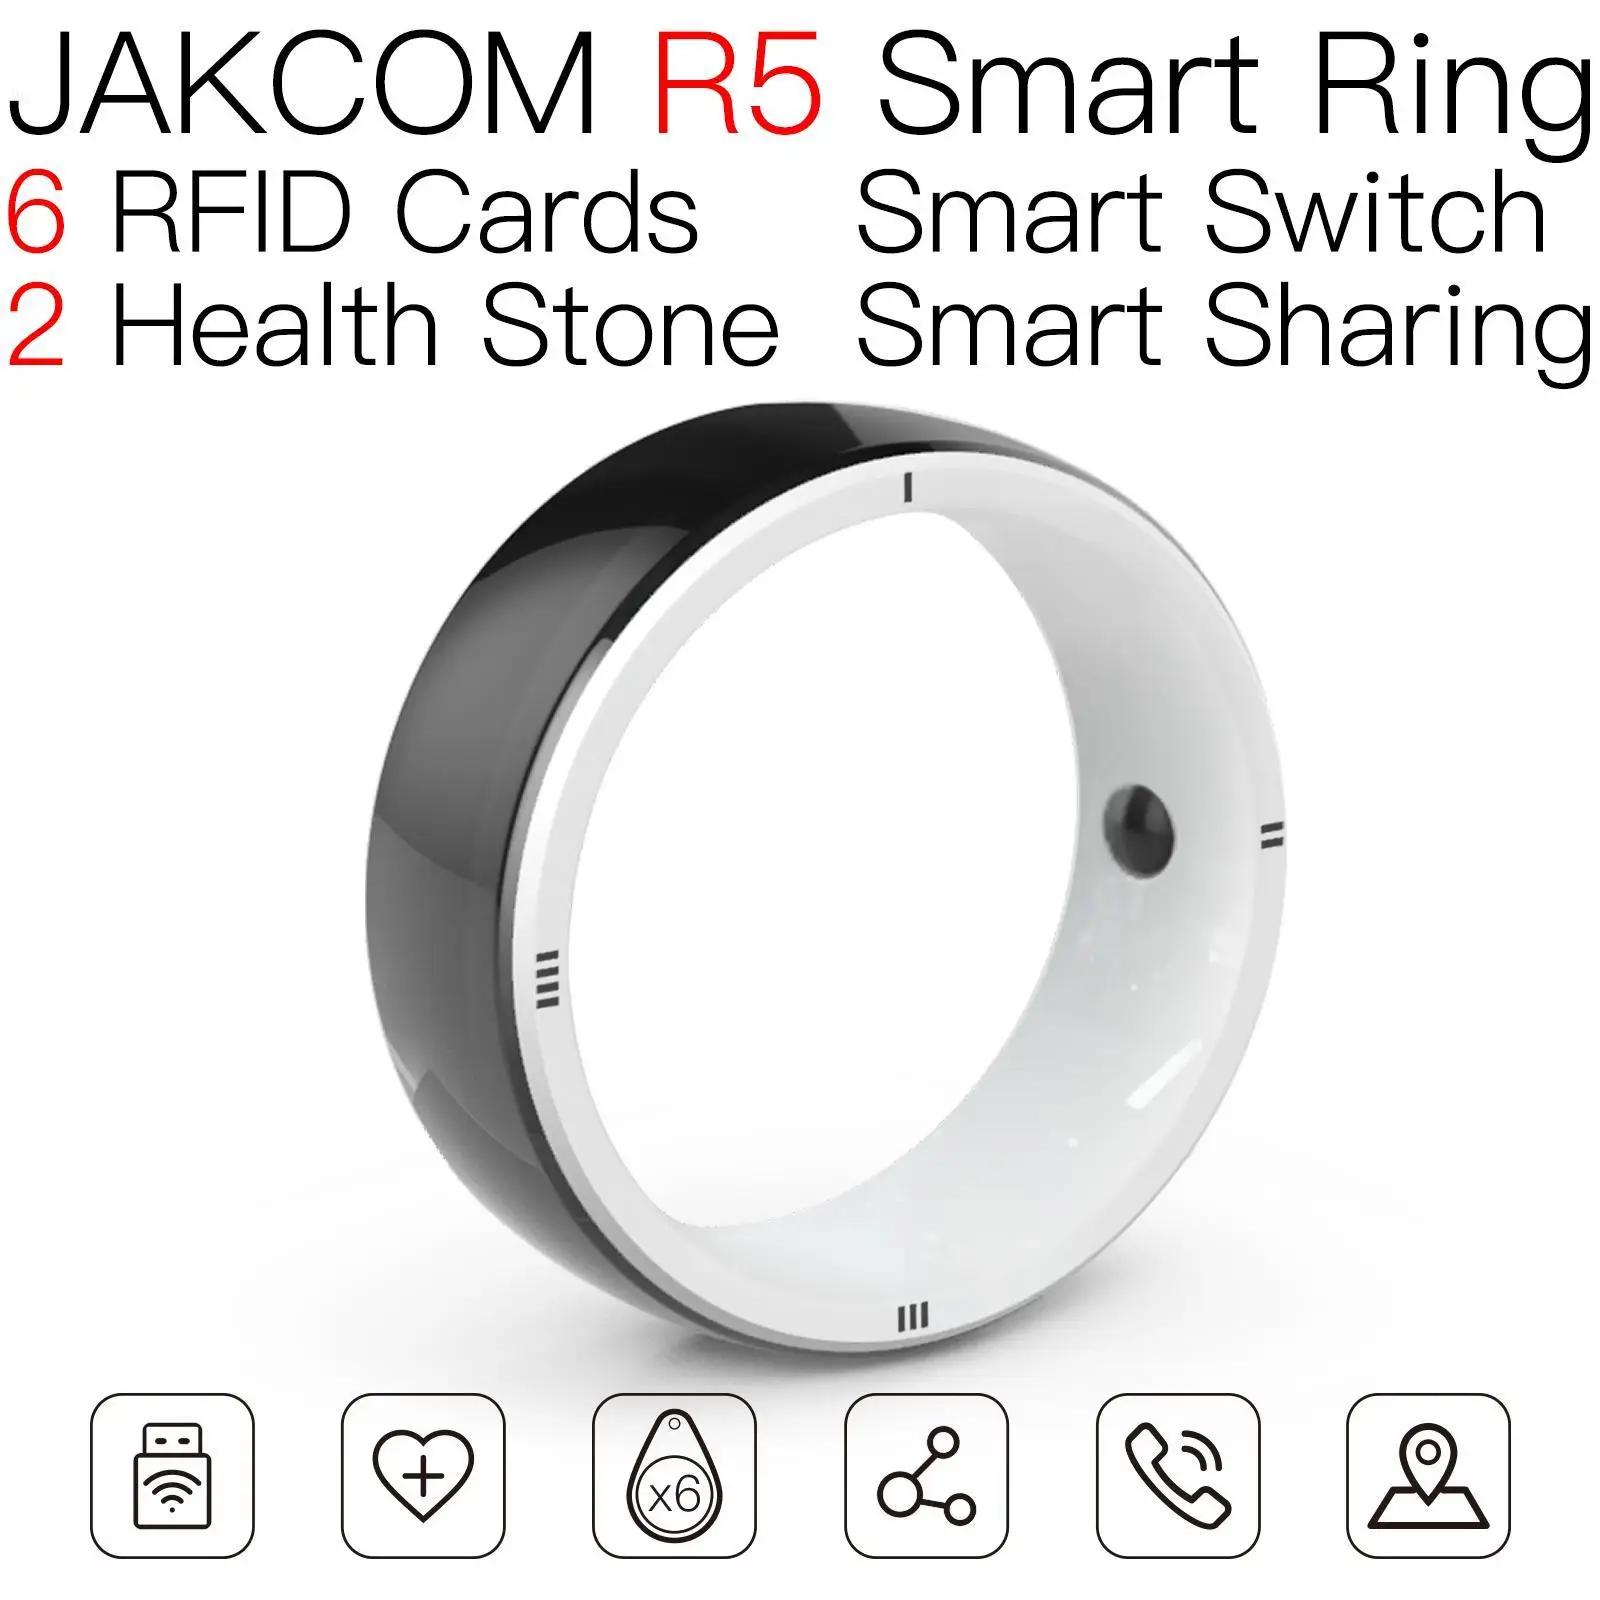 

JAKCOM R5 Smart Ring Super value as waterproof button motorcycle jeux switch kart 8 deluxe switch car rfid tag ntag rewrite pet